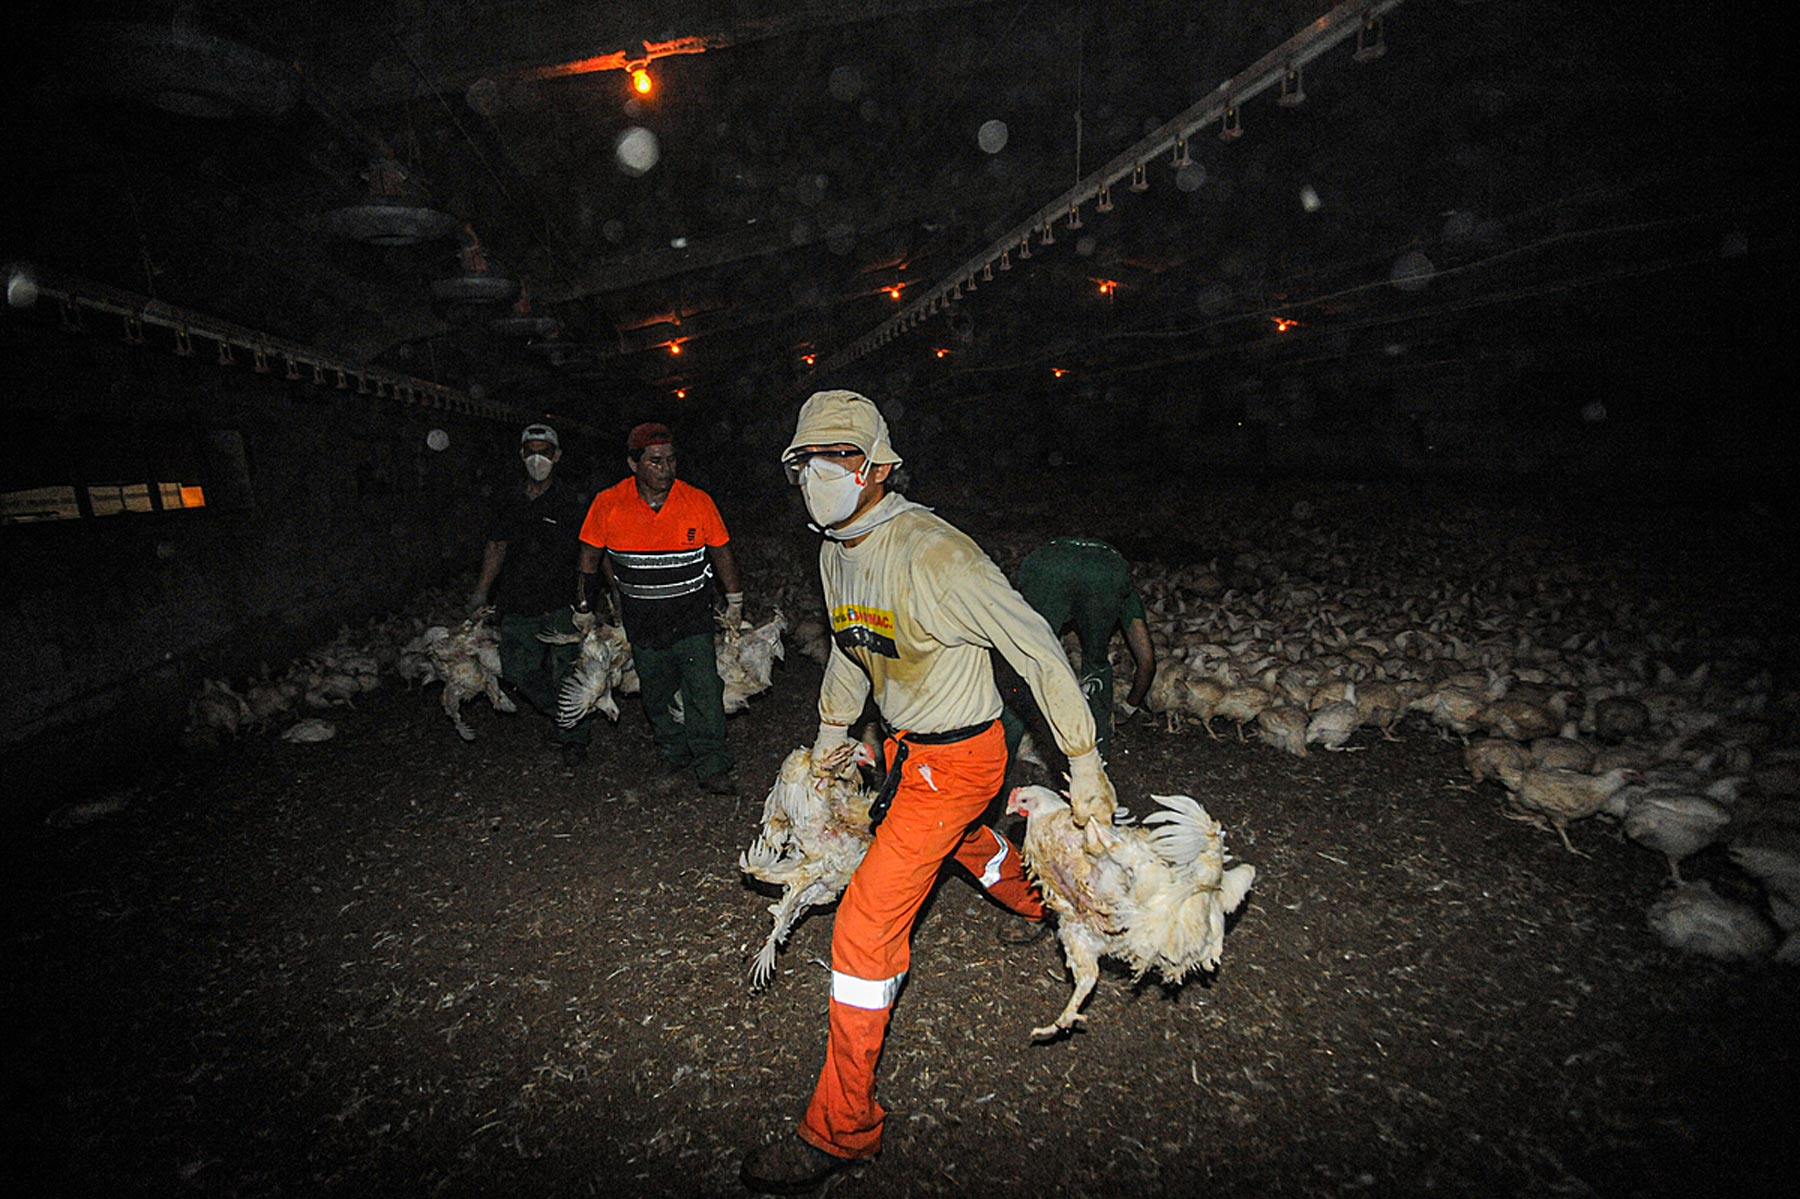 Workers round up 25,000 chickens for transport and slaughter.